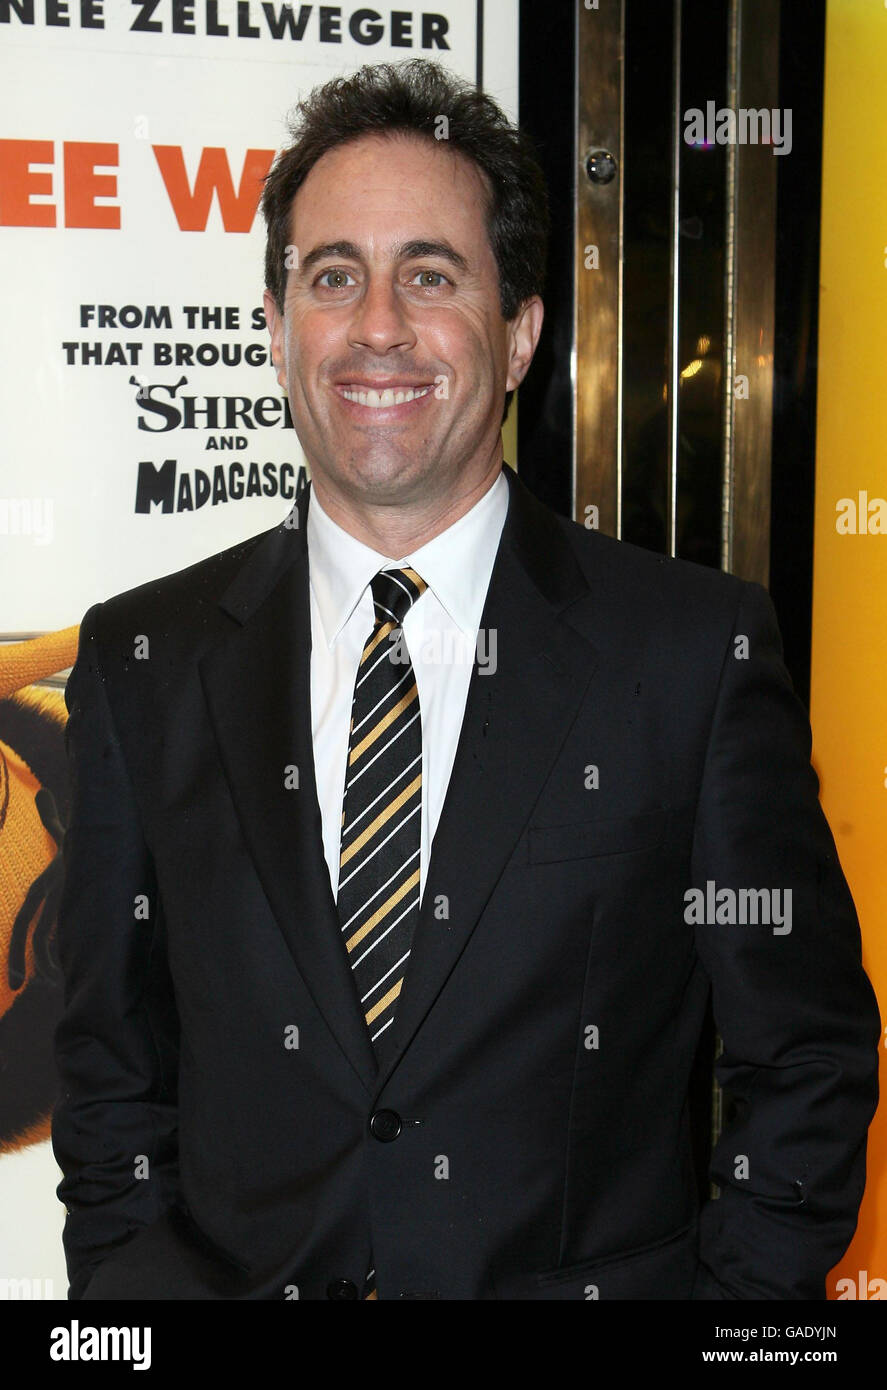 UK Premiere of Bee Movie - London. Jerry Seinfeld arrives for the UK Premiere of Bee Movie at Empire in Leicester Square, central London. Stock Photo